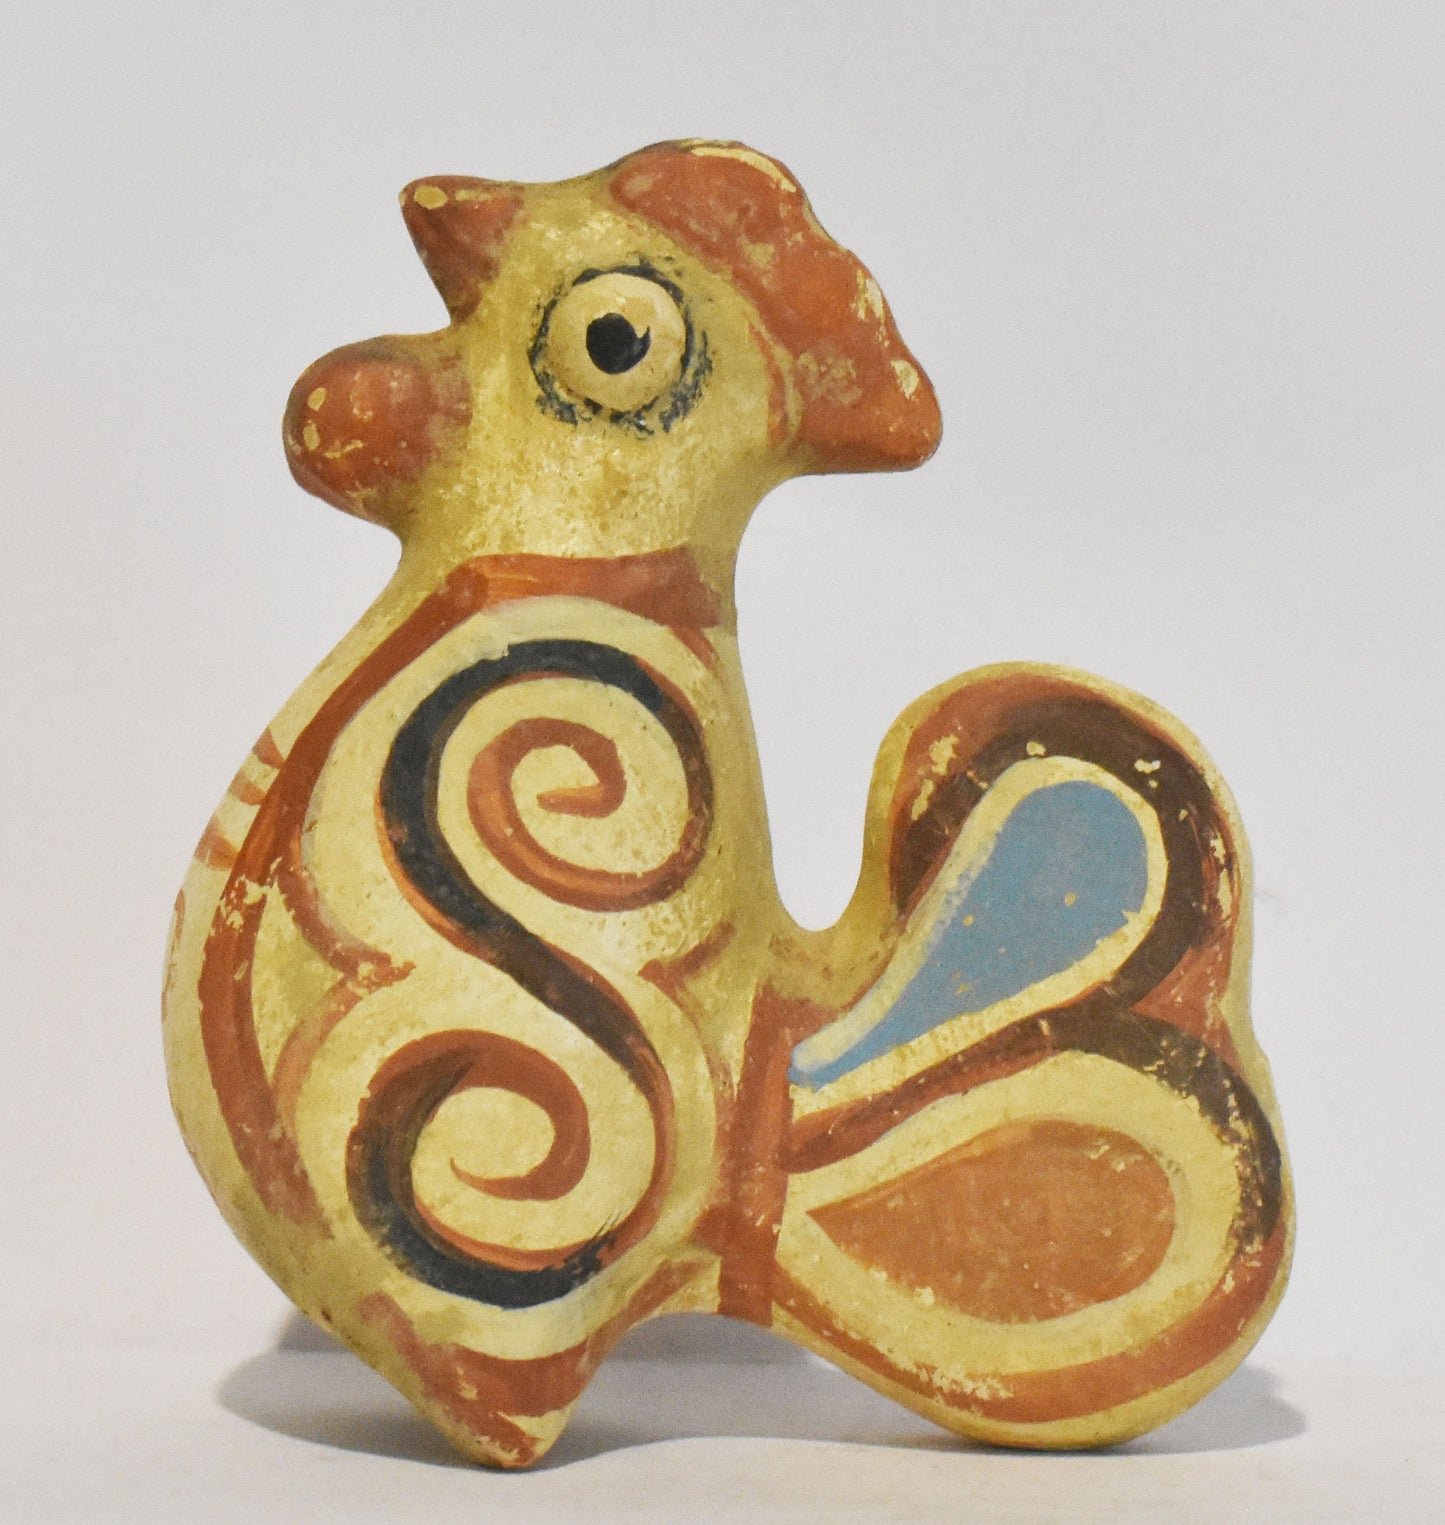 Idol of a Rooster - Attica, Athens - 650 BC - Alectryon's Myth - Miniature - Museum Reproduction - Ceramic Artifact